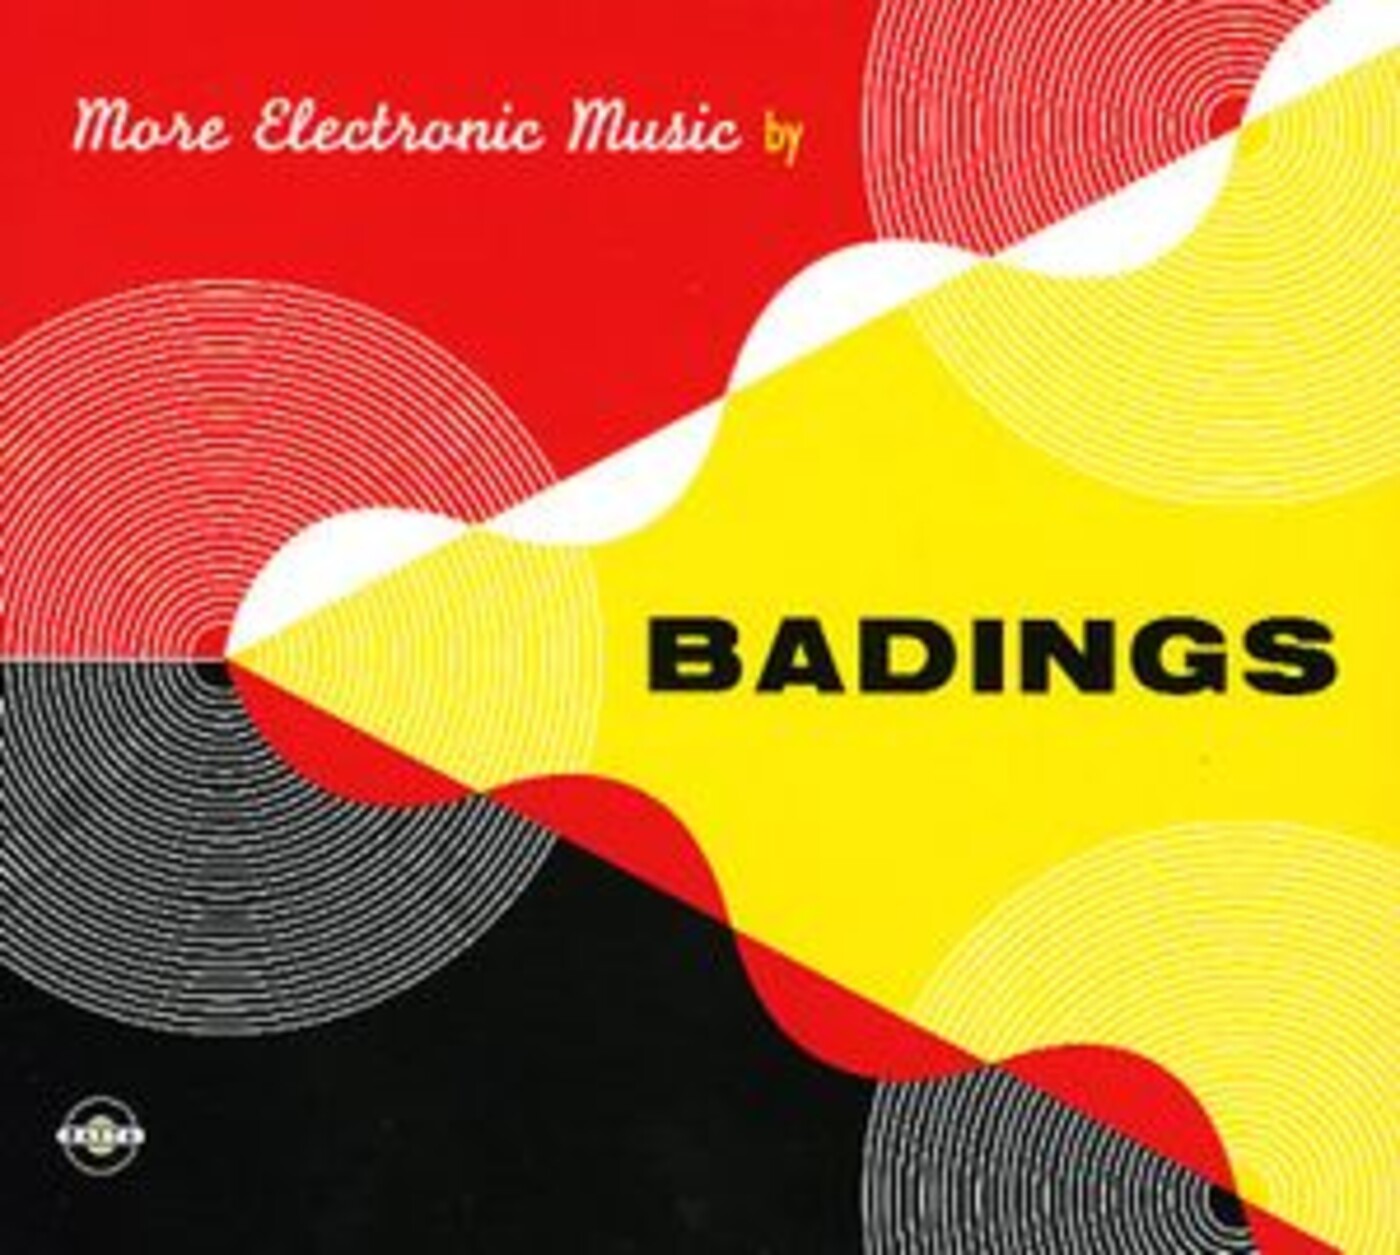 Henk Badings - Dialogues for Man and Machine